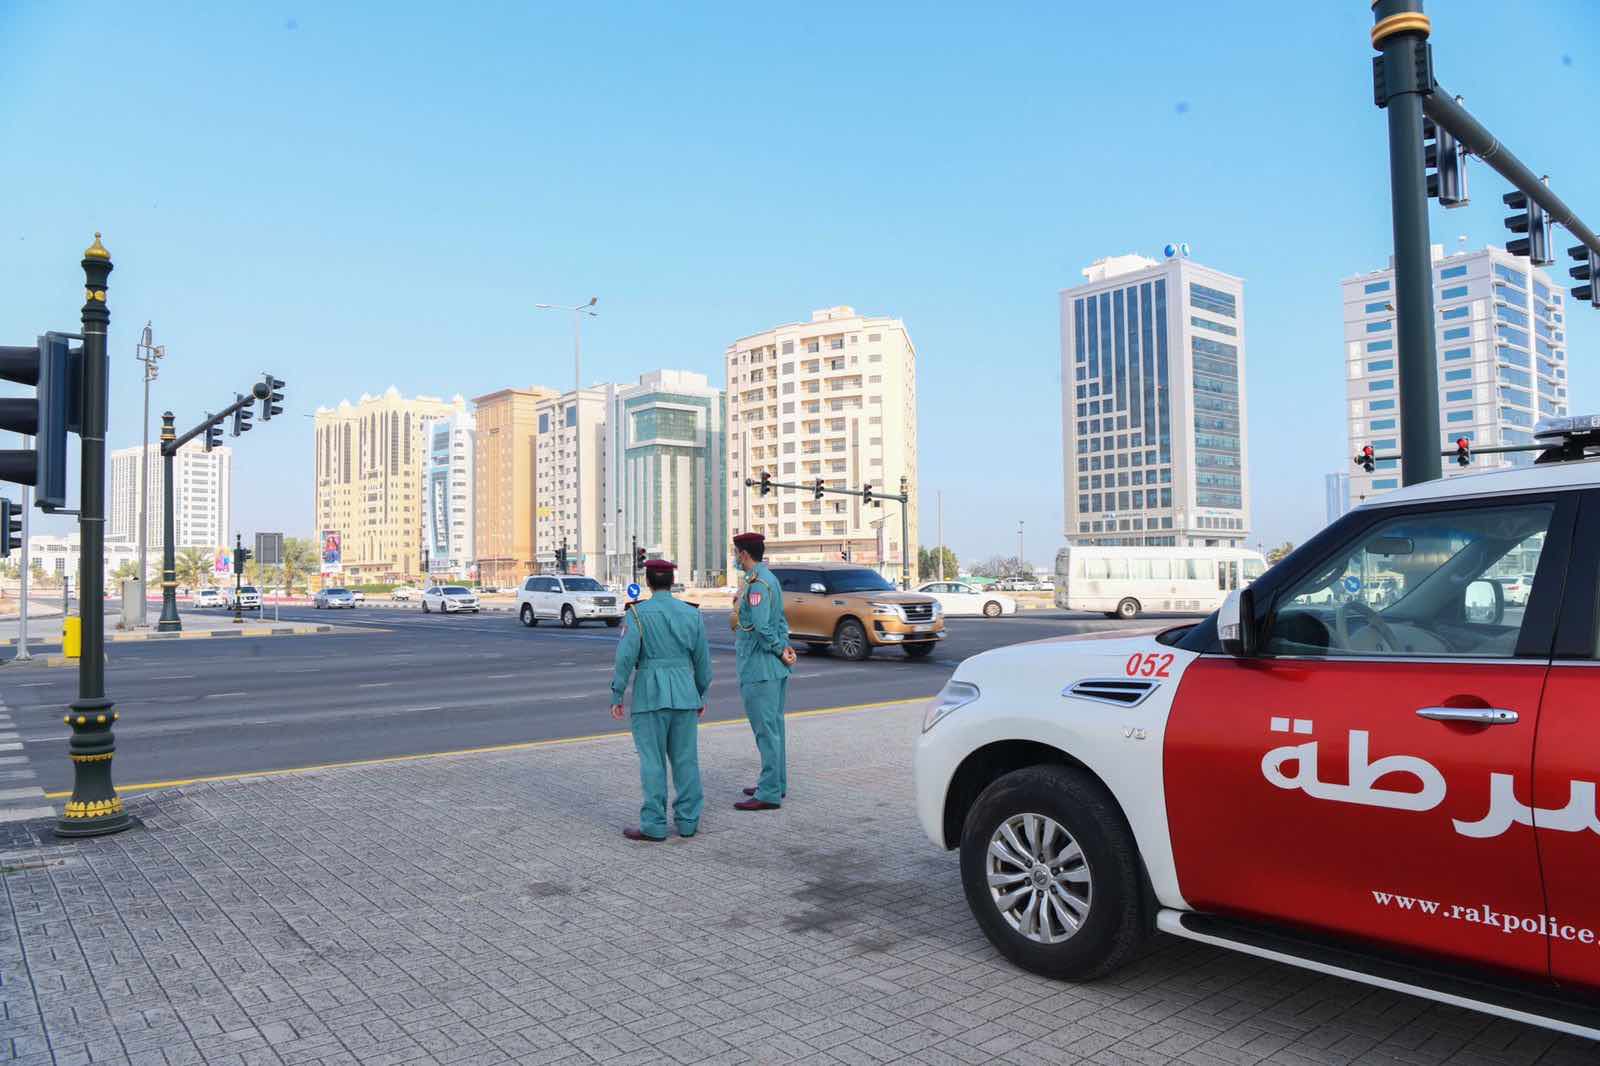 ras al khaimah to tighten laws for traffic offences and car impoundment from march 1